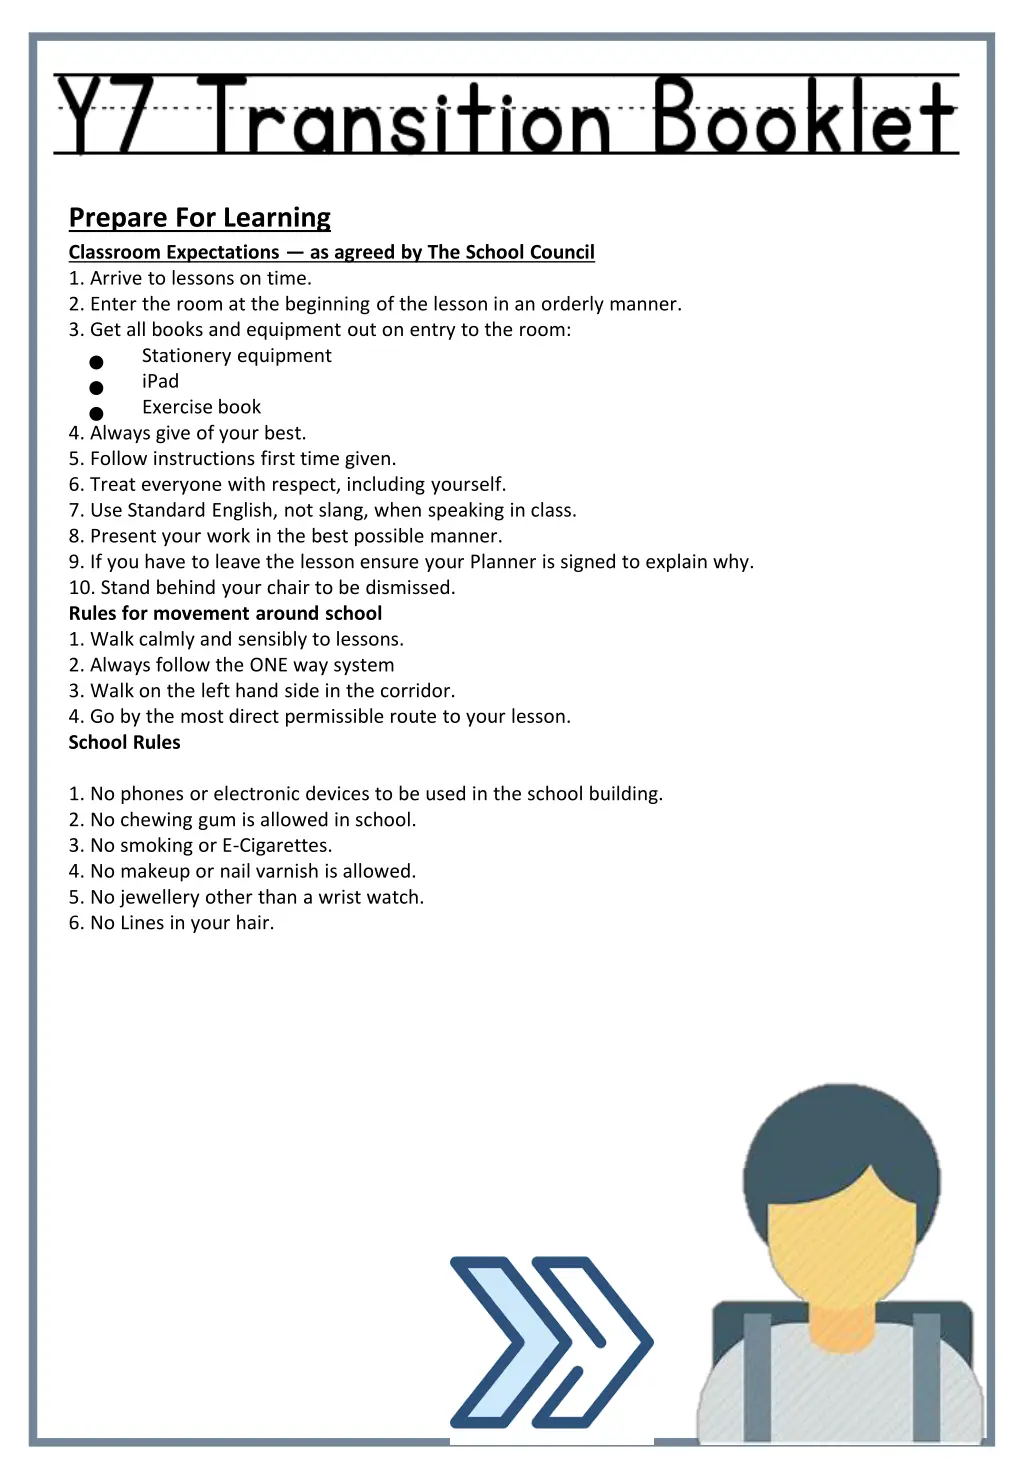 prepare for learning classroom expectations